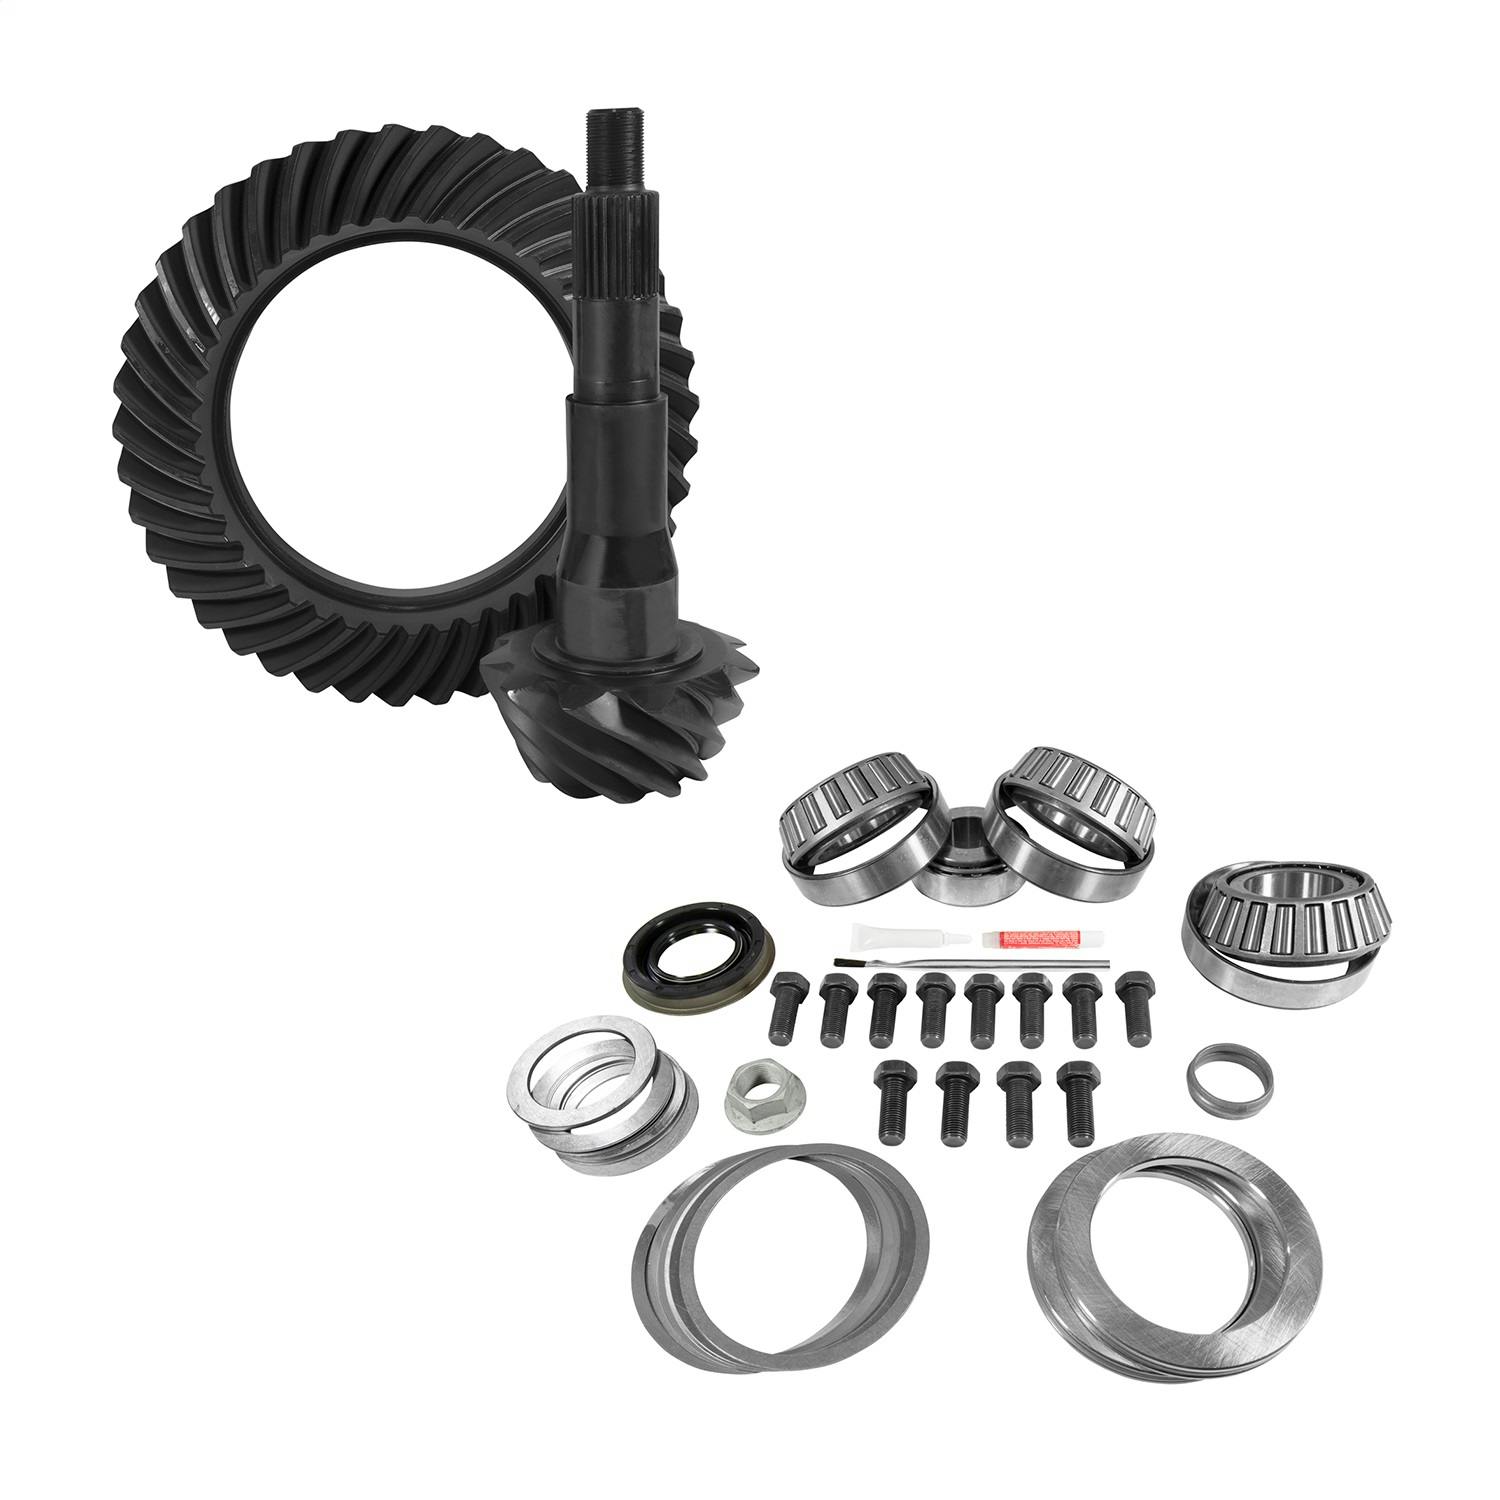 USA Standard Gear ZGK2132 10.5in. Ford 4.11 Rear Ring/Pinion and Install Kit